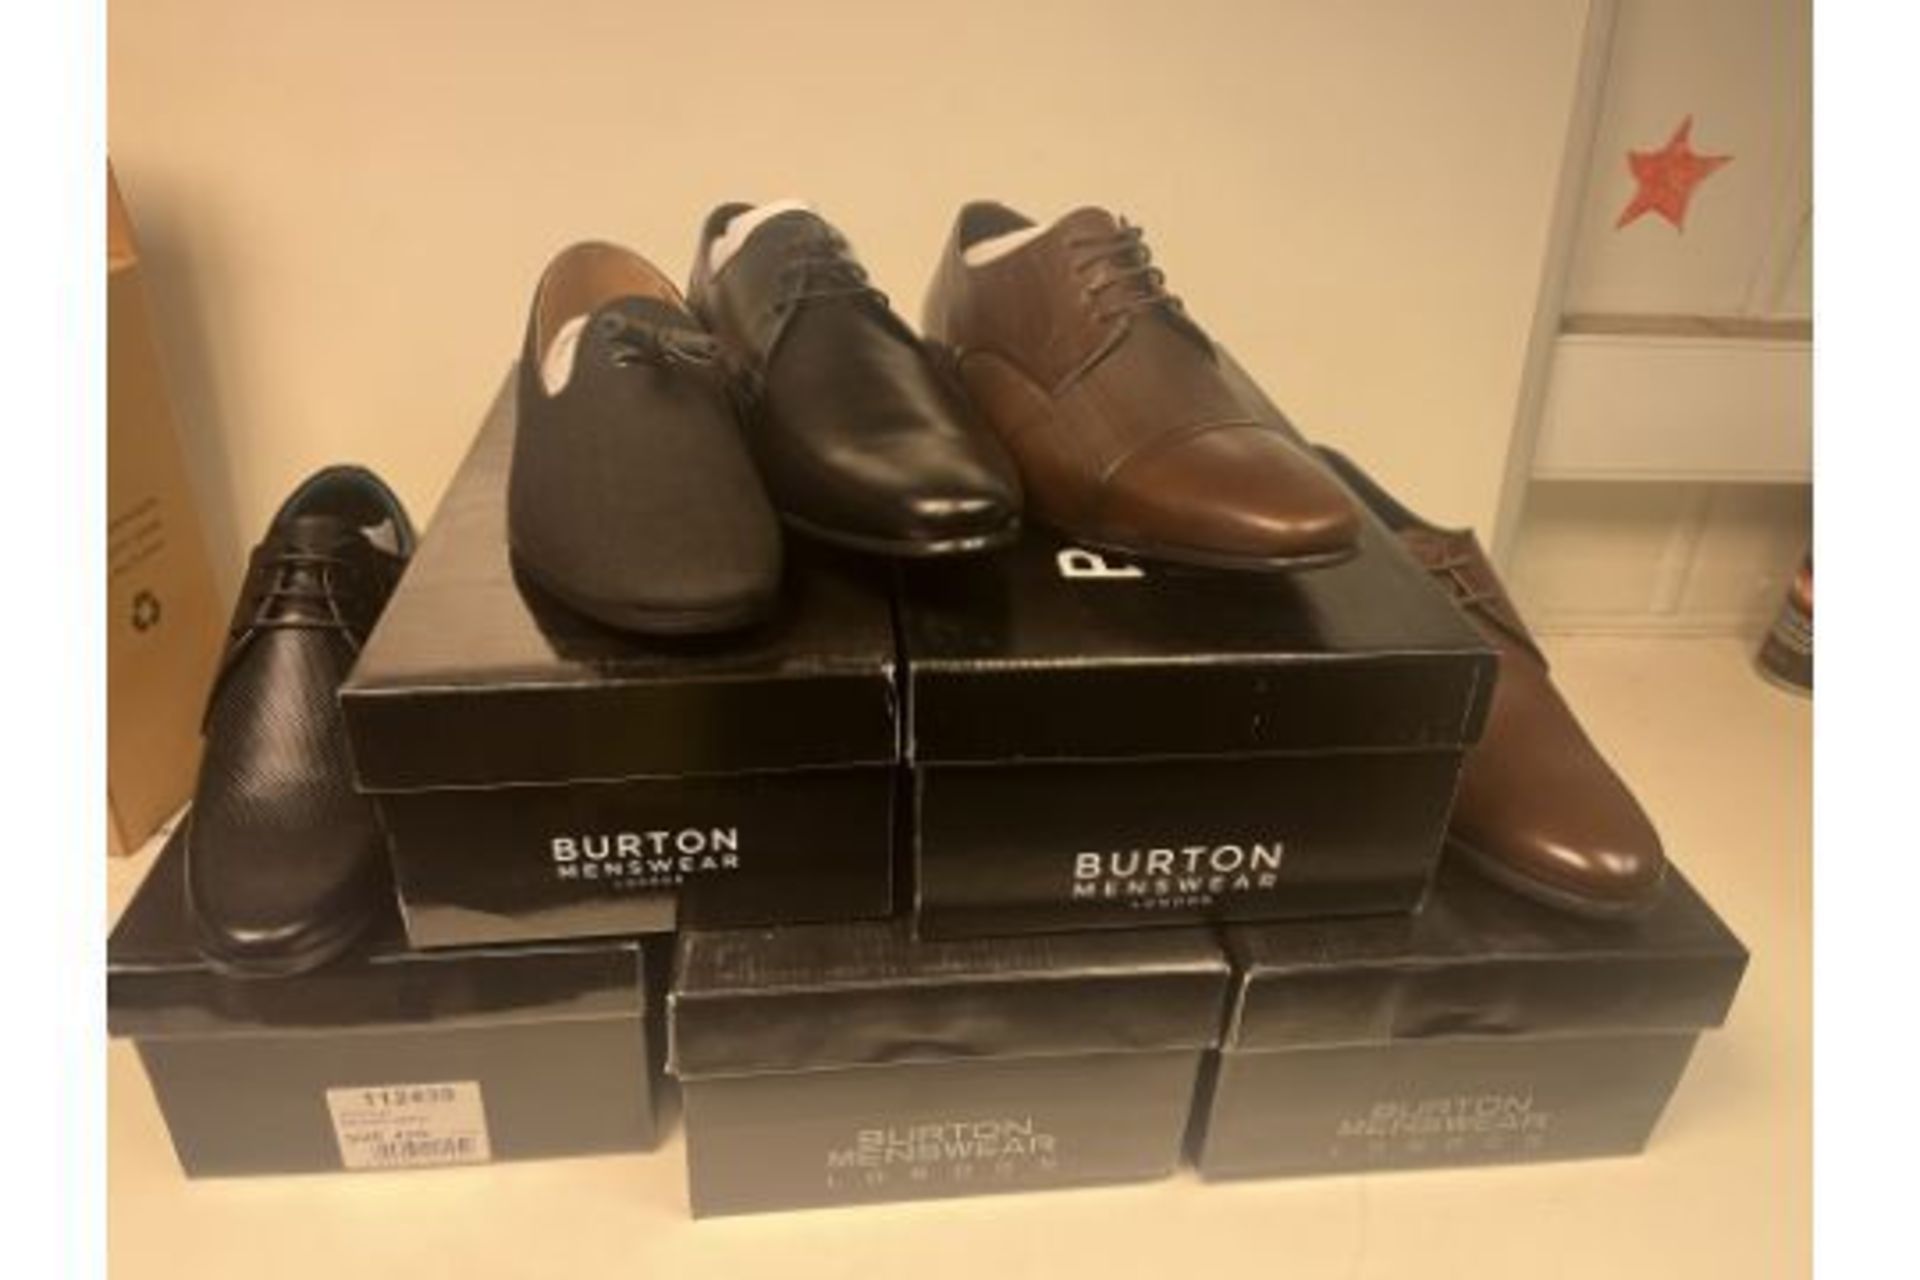 10 X BRAND NEW ASSORTED BURTONS SHOES IN VARIOUS STYLES AND SIZES R15